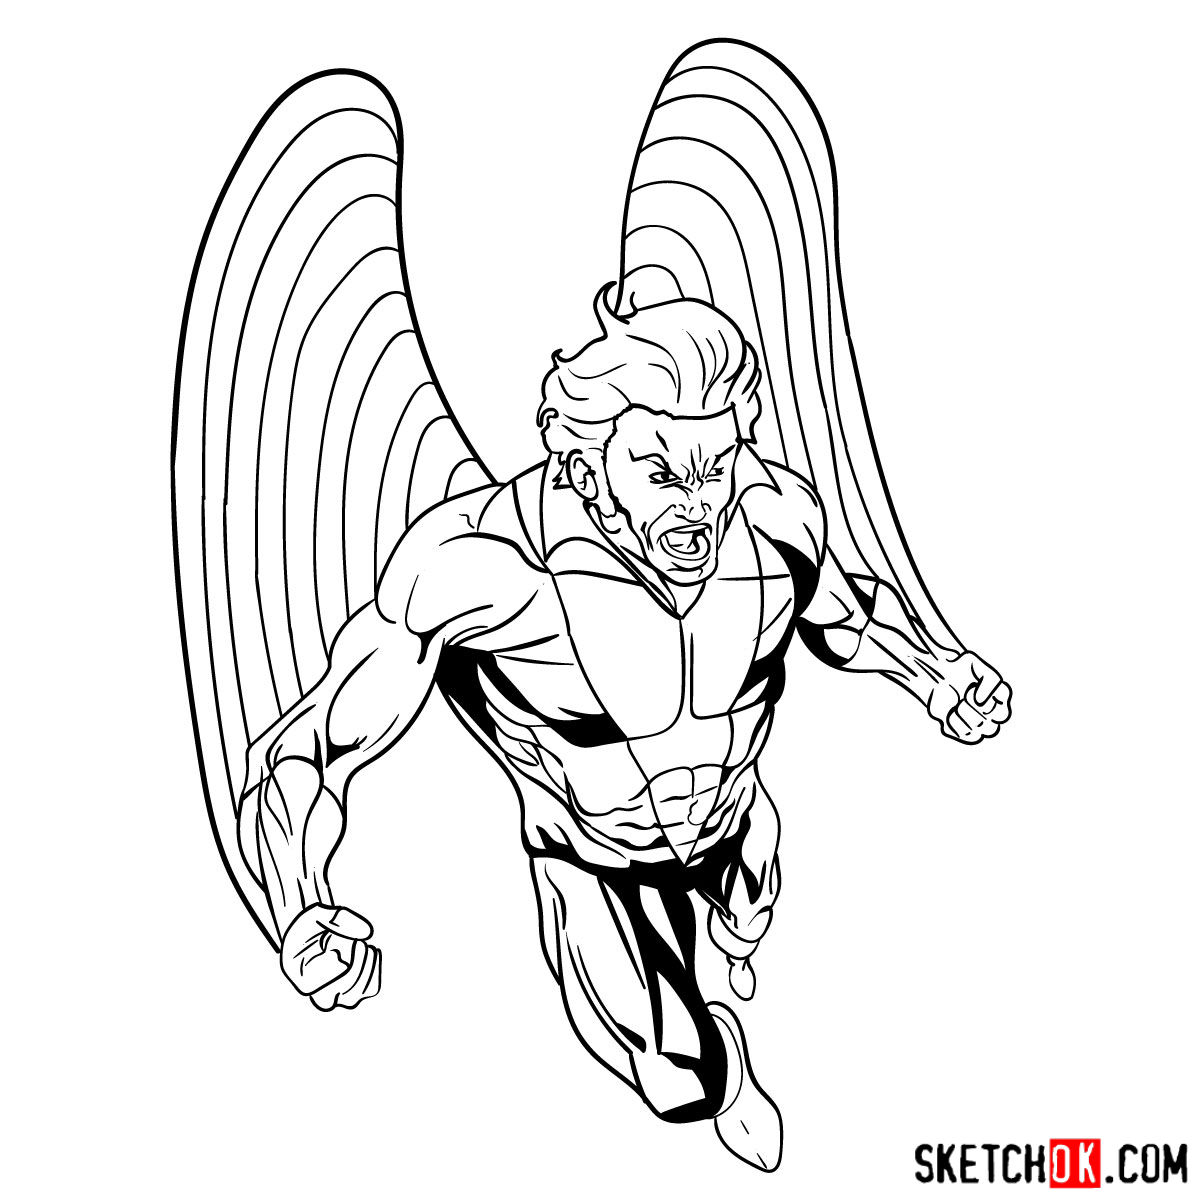 How to draw Banshee mutant from X-Men - step 20